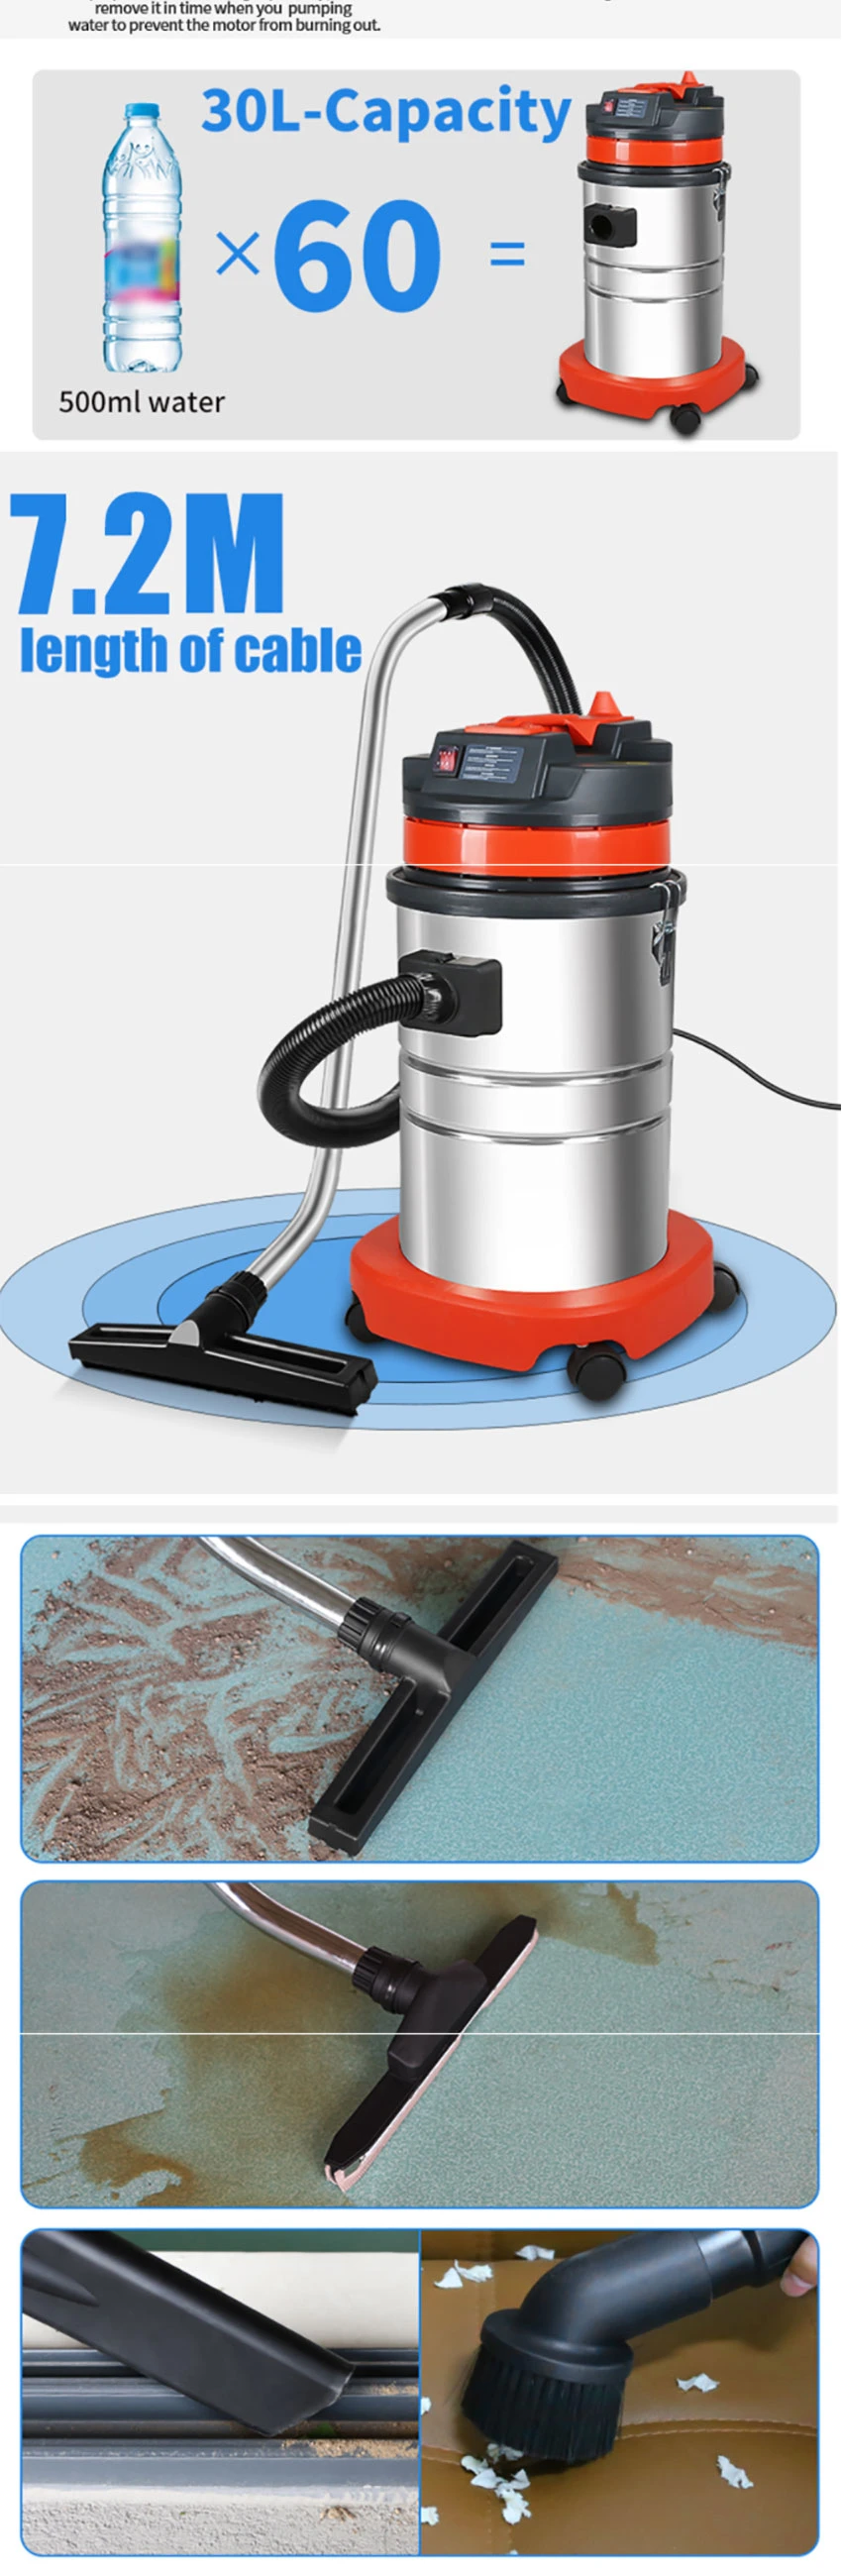 Wet&Dry Vacuum Cleaner, 30L Car Washer and Carpet Cleaning Portable Heavy-Duty Car Vacuum Cleaner with Ss Tank